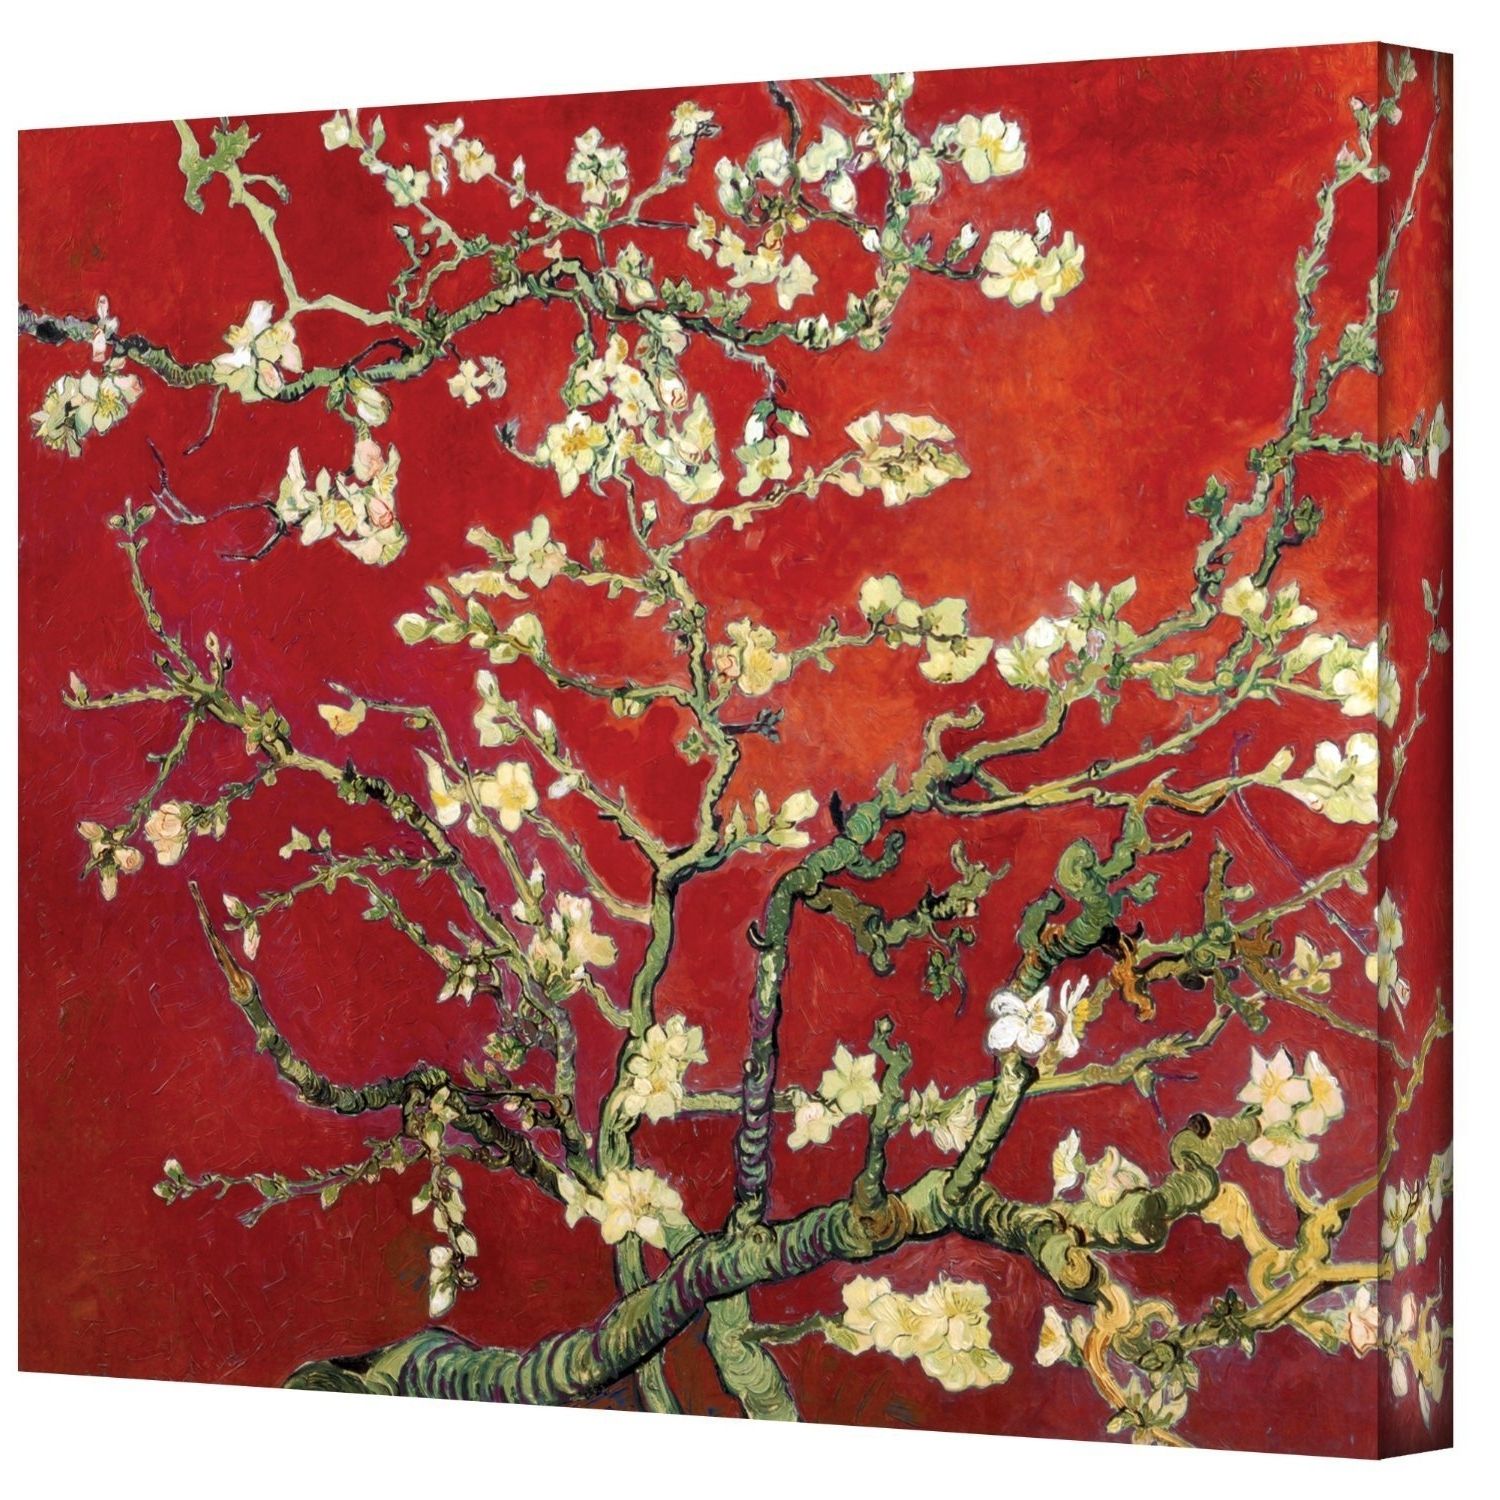 Almond Blossoms Vincent Van Gogh Wall Art Pertaining To Favorite Amazon: Art Walls Interpretation In Red Blossoming Almond Tree (View 3 of 15)